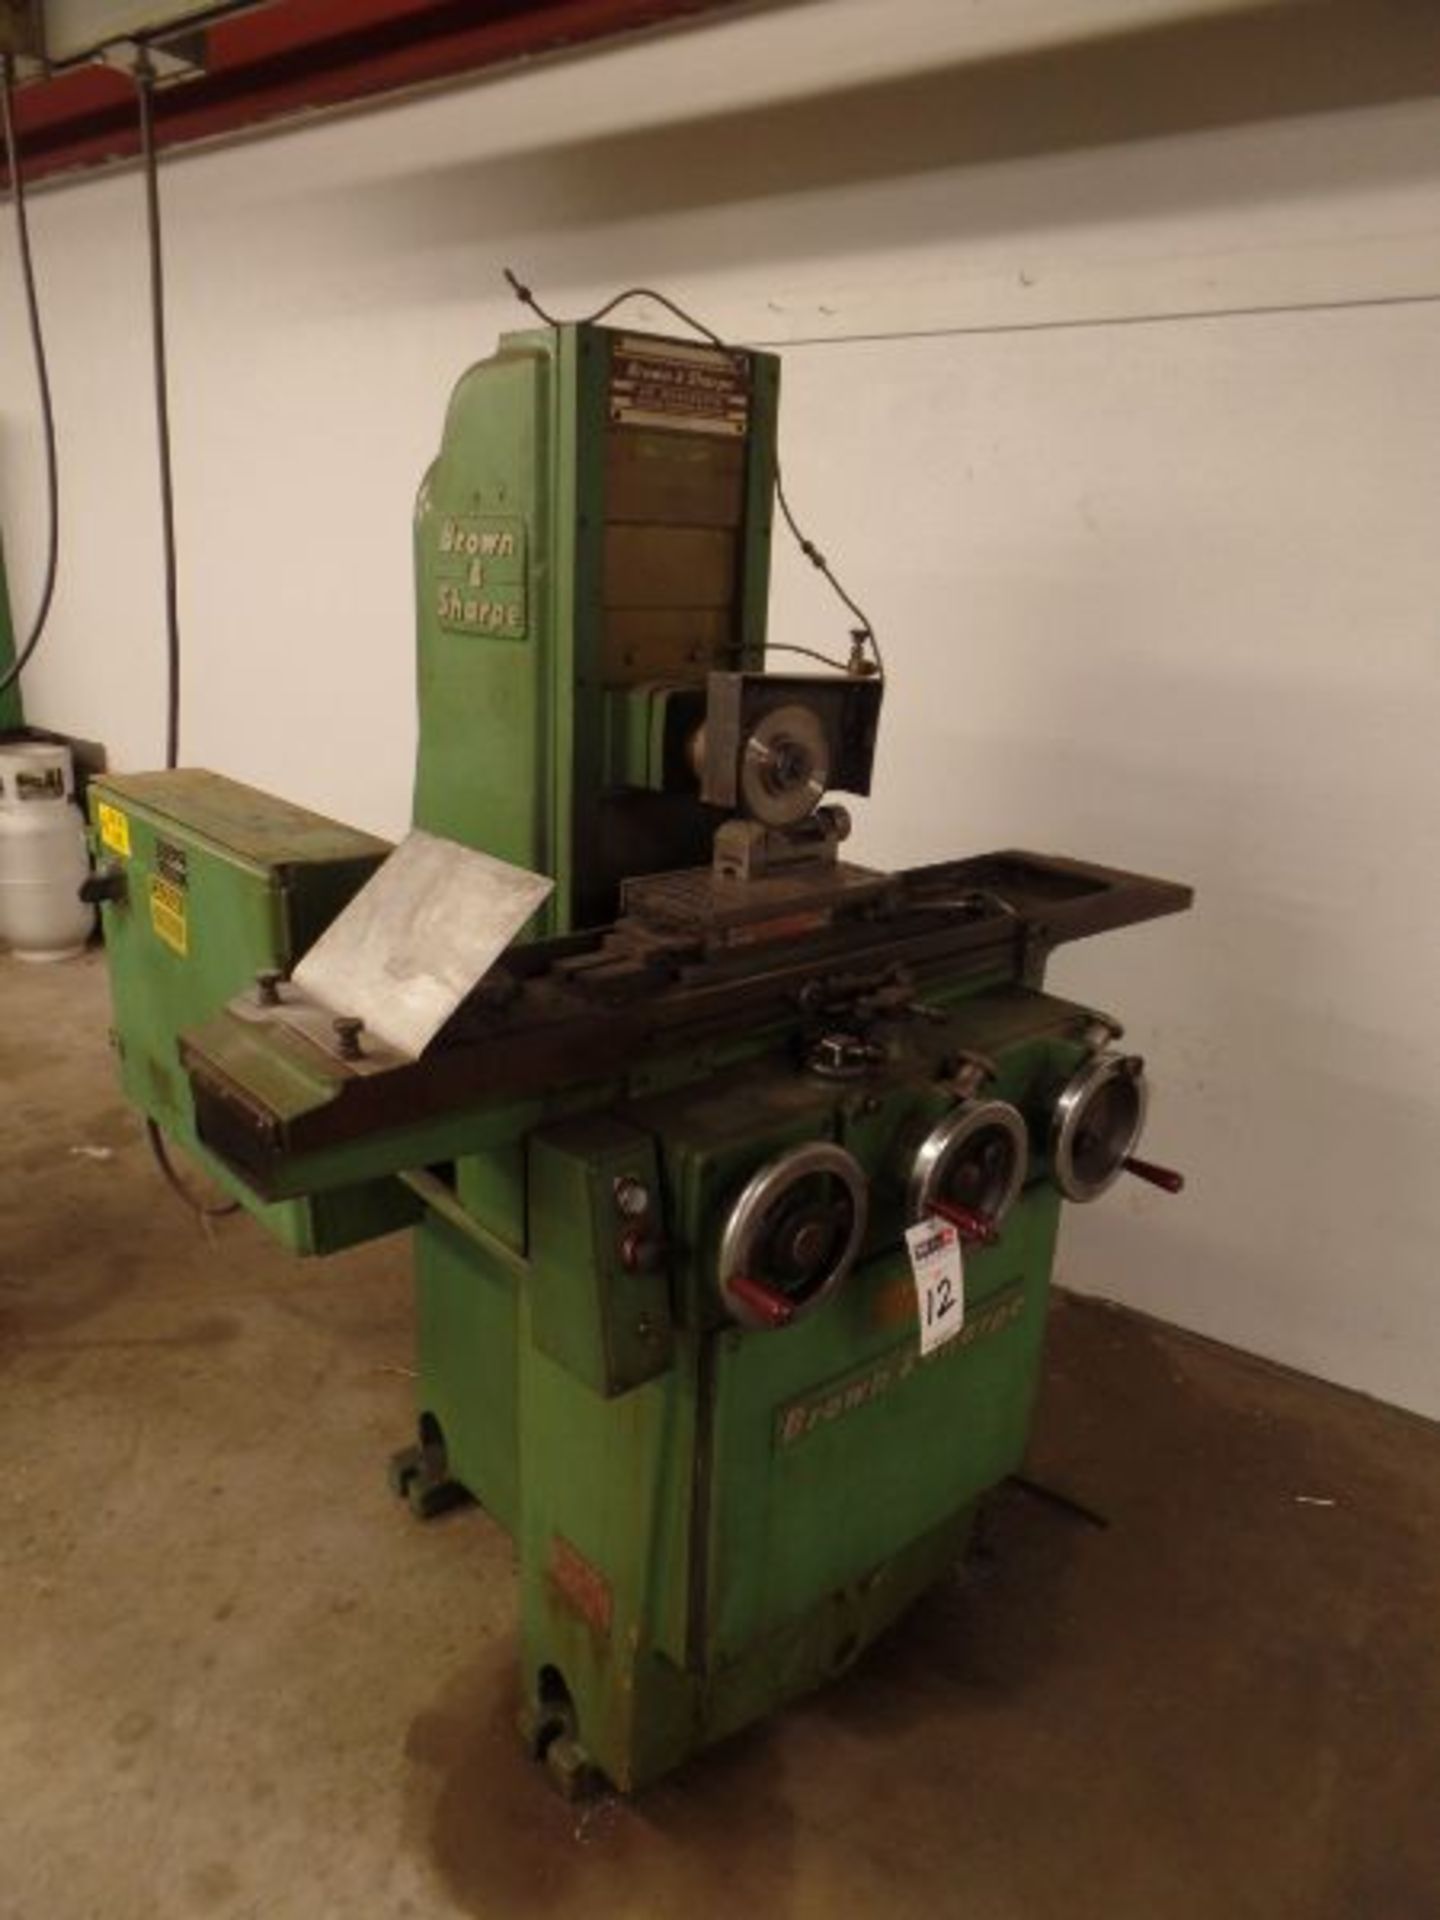 Brown & Sharpe 618 Micromaster Hyd. Surface Grinder, 6"x18" Magnetic Chuck, S/N 523-6181-797 - Image 2 of 10